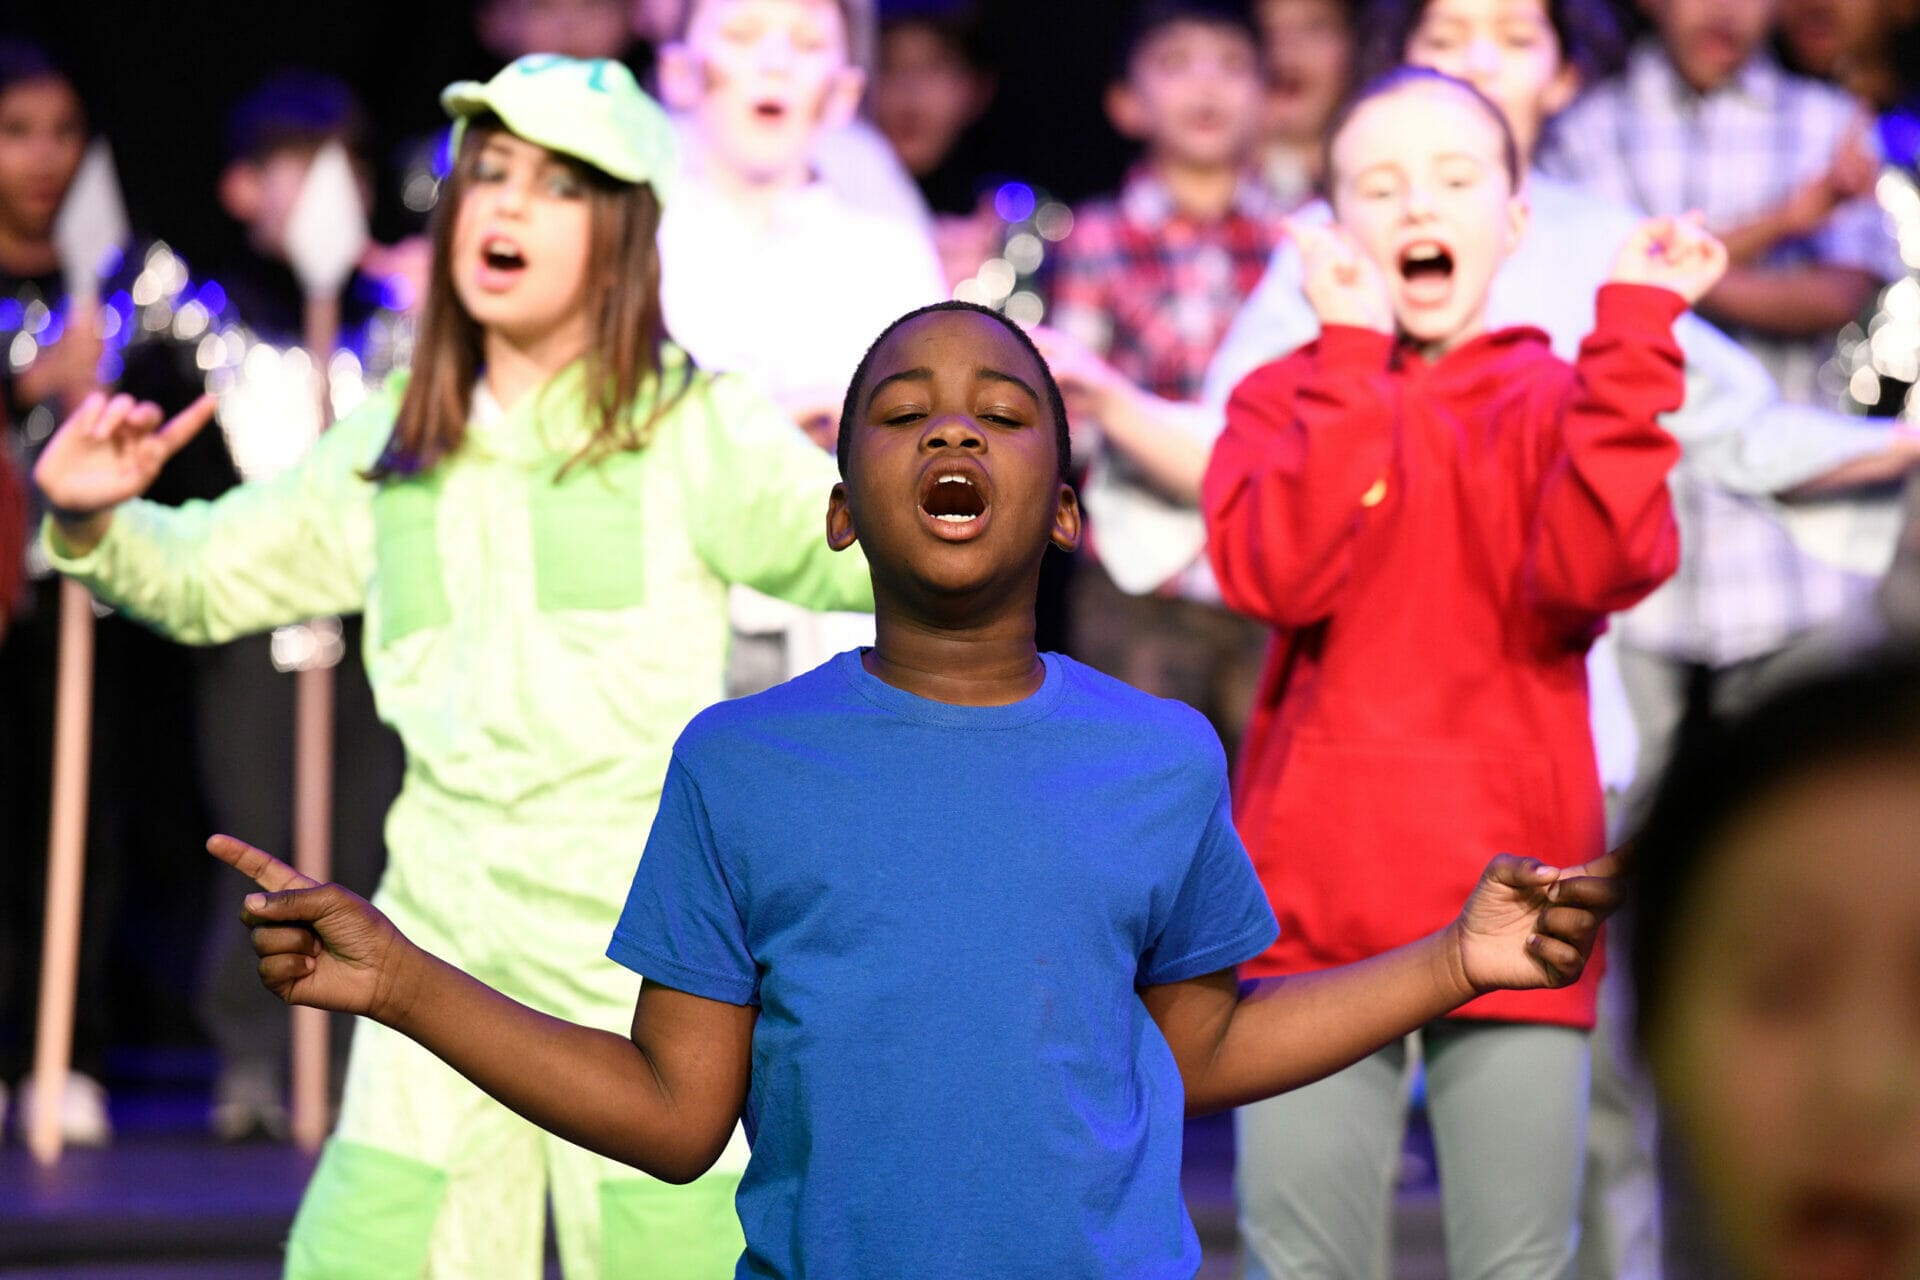 A boy in a blue t-shirt has his eyes closed and fingers pointing outwards whilst singing in a group.